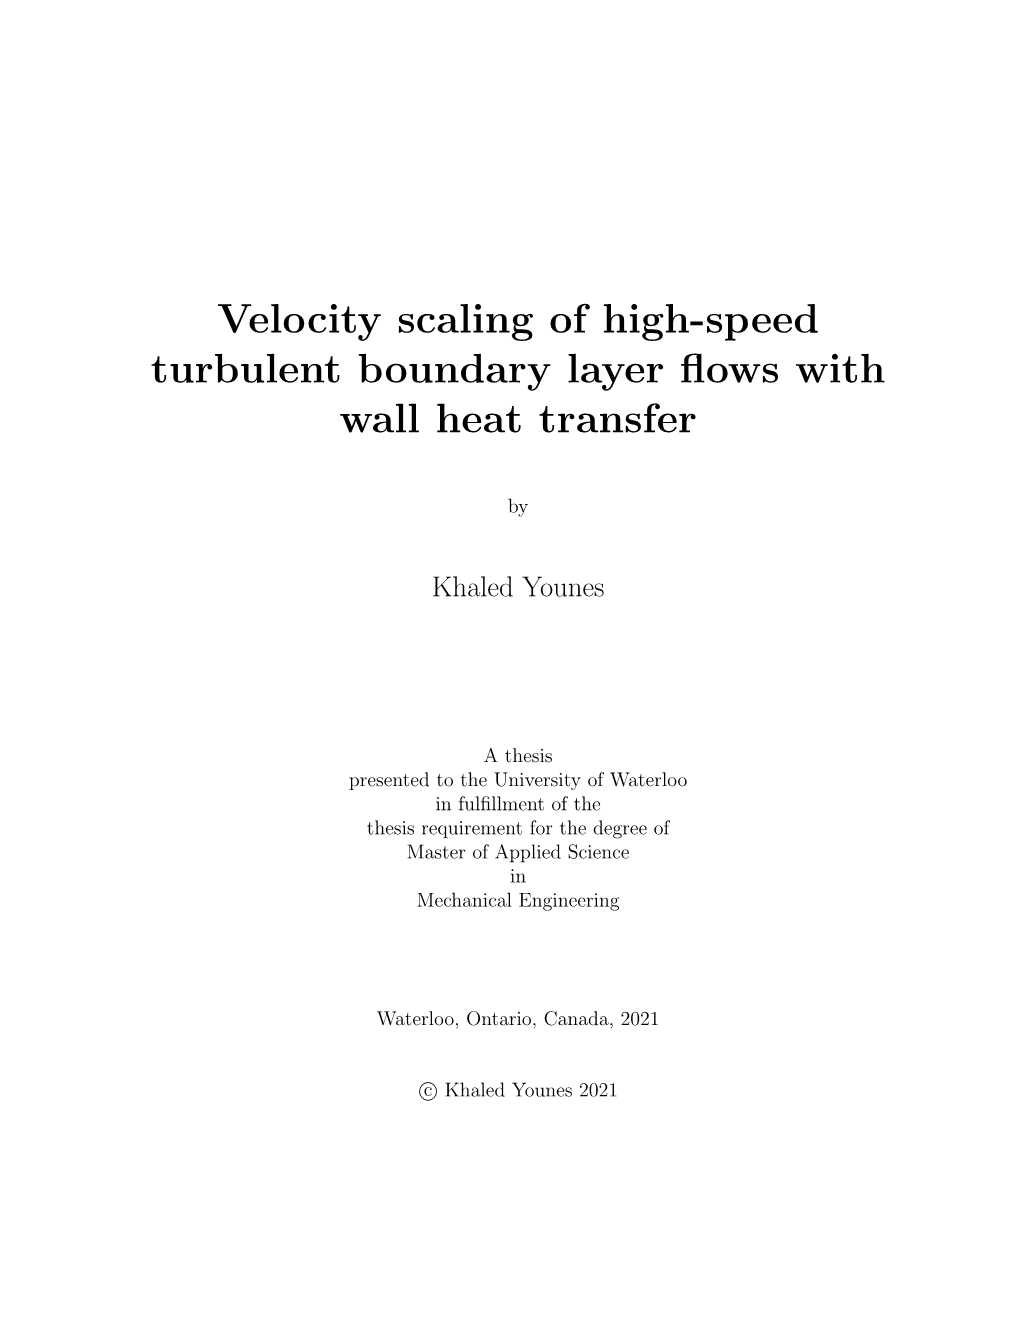 Velocity Scaling of High-Speed Turbulent Boundary Layer Flows With